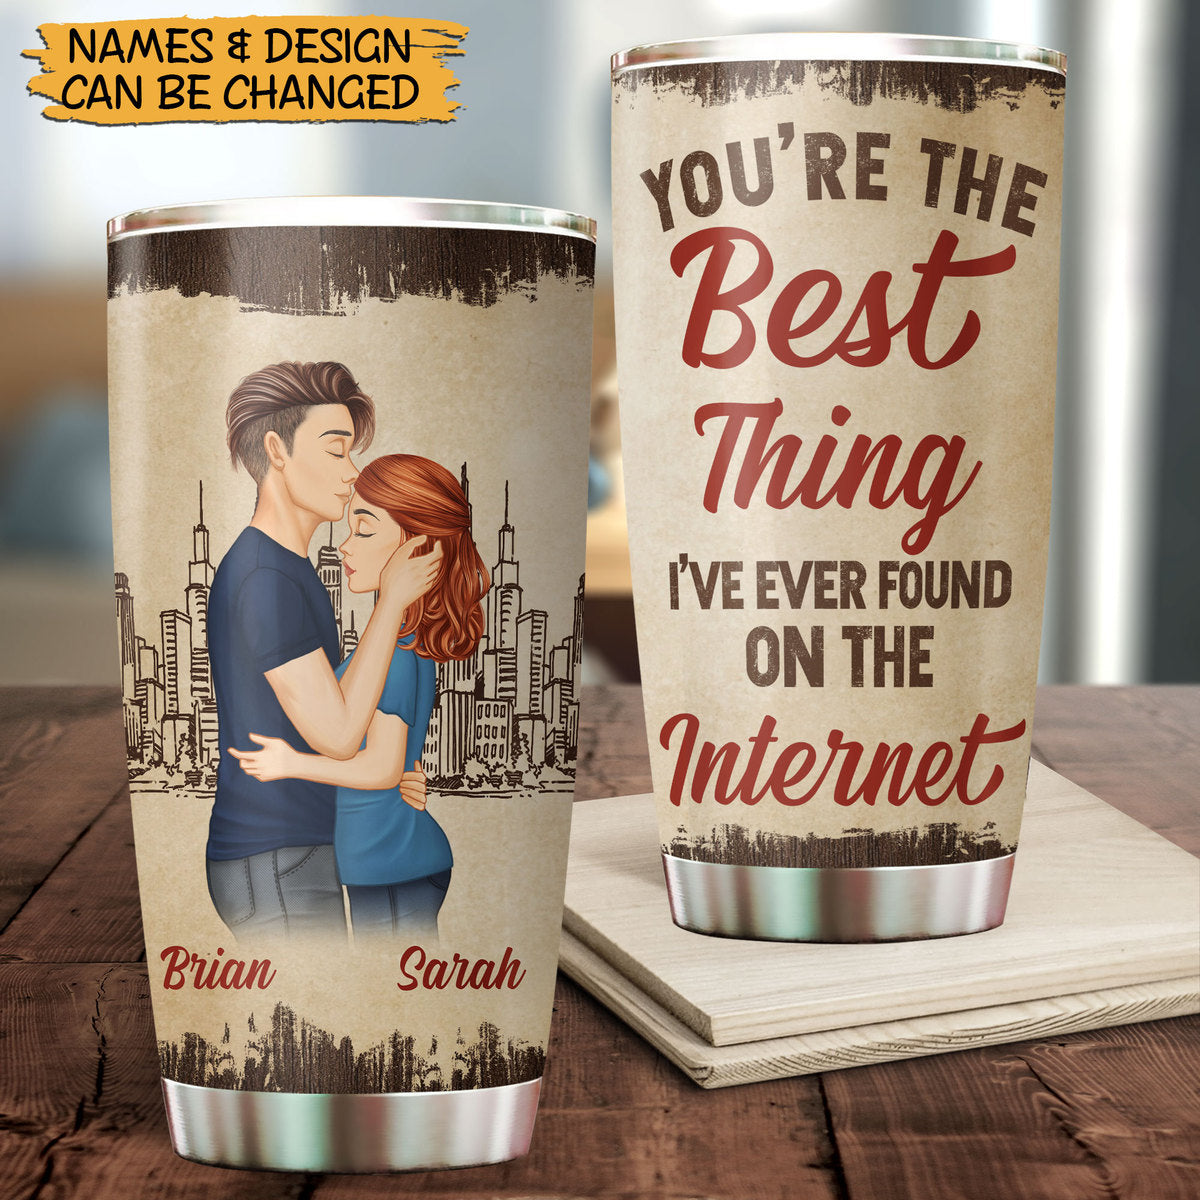 Personalized Valentine's Gifts ❤ Personalized Romantic Gifts